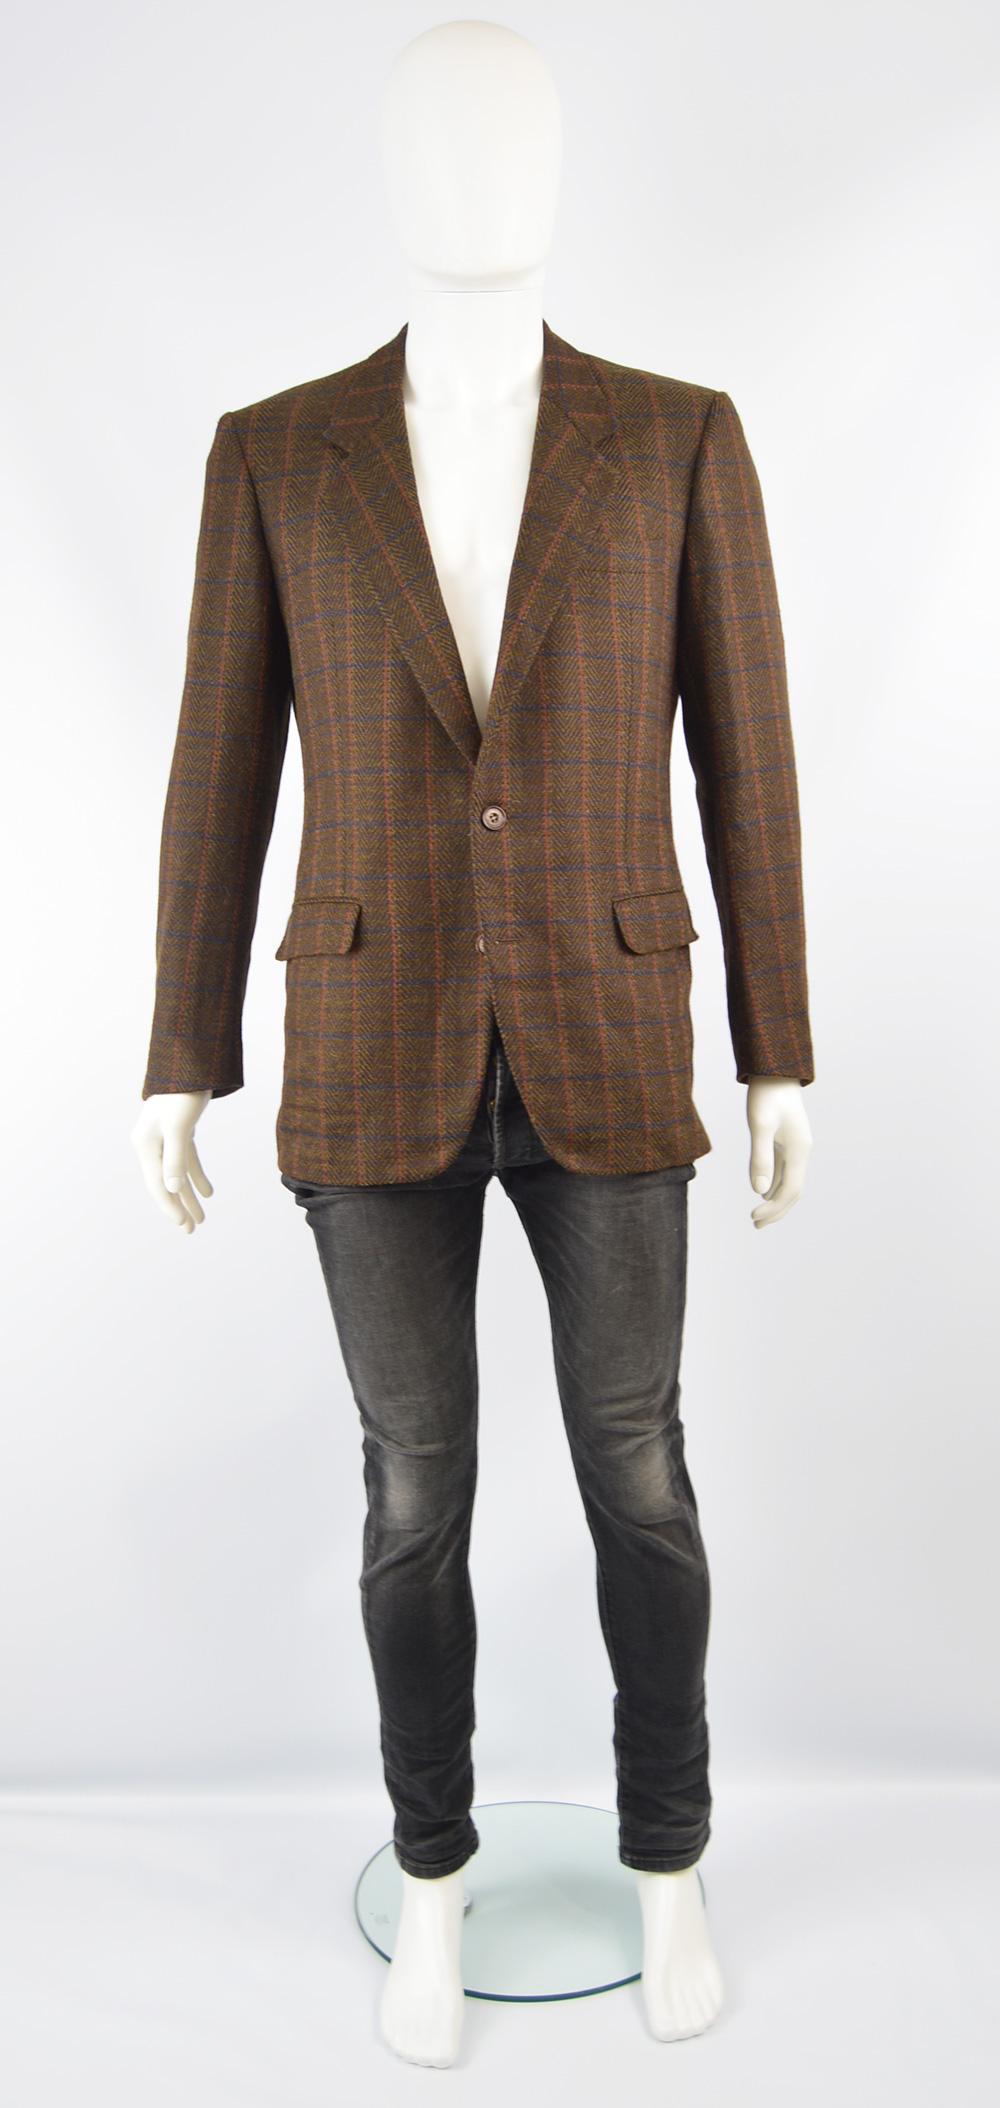 A stylish and very rare vintage men's blazer jacket from the late 60s / early 70s by legendary French fashion designer, Yves Saint Laurent for the iconic Rive Gauche line, which it is so rare to find menswear in rather than the licensed 'Pour Homme'